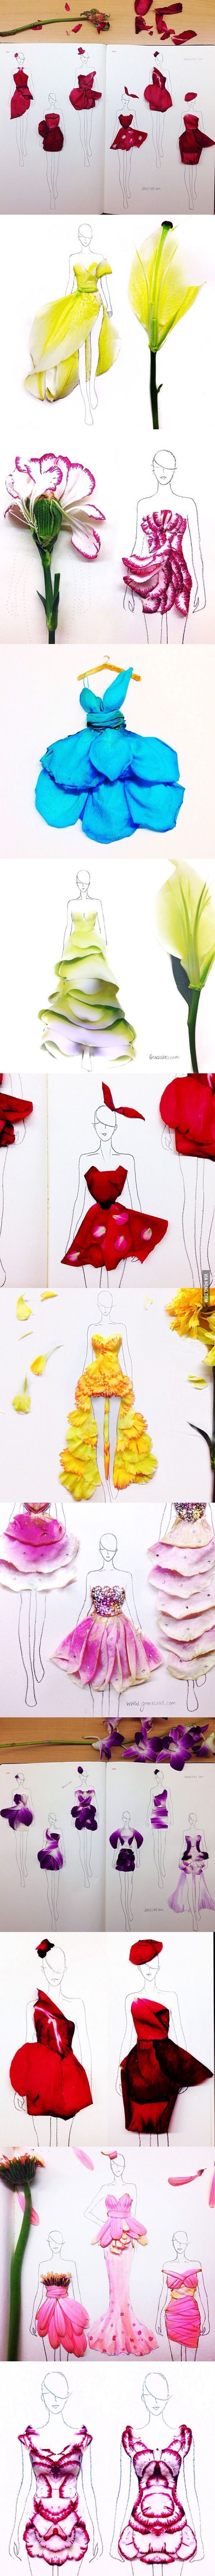 Clever Fashion Illustrations With Real Flower Petals As Clothing.